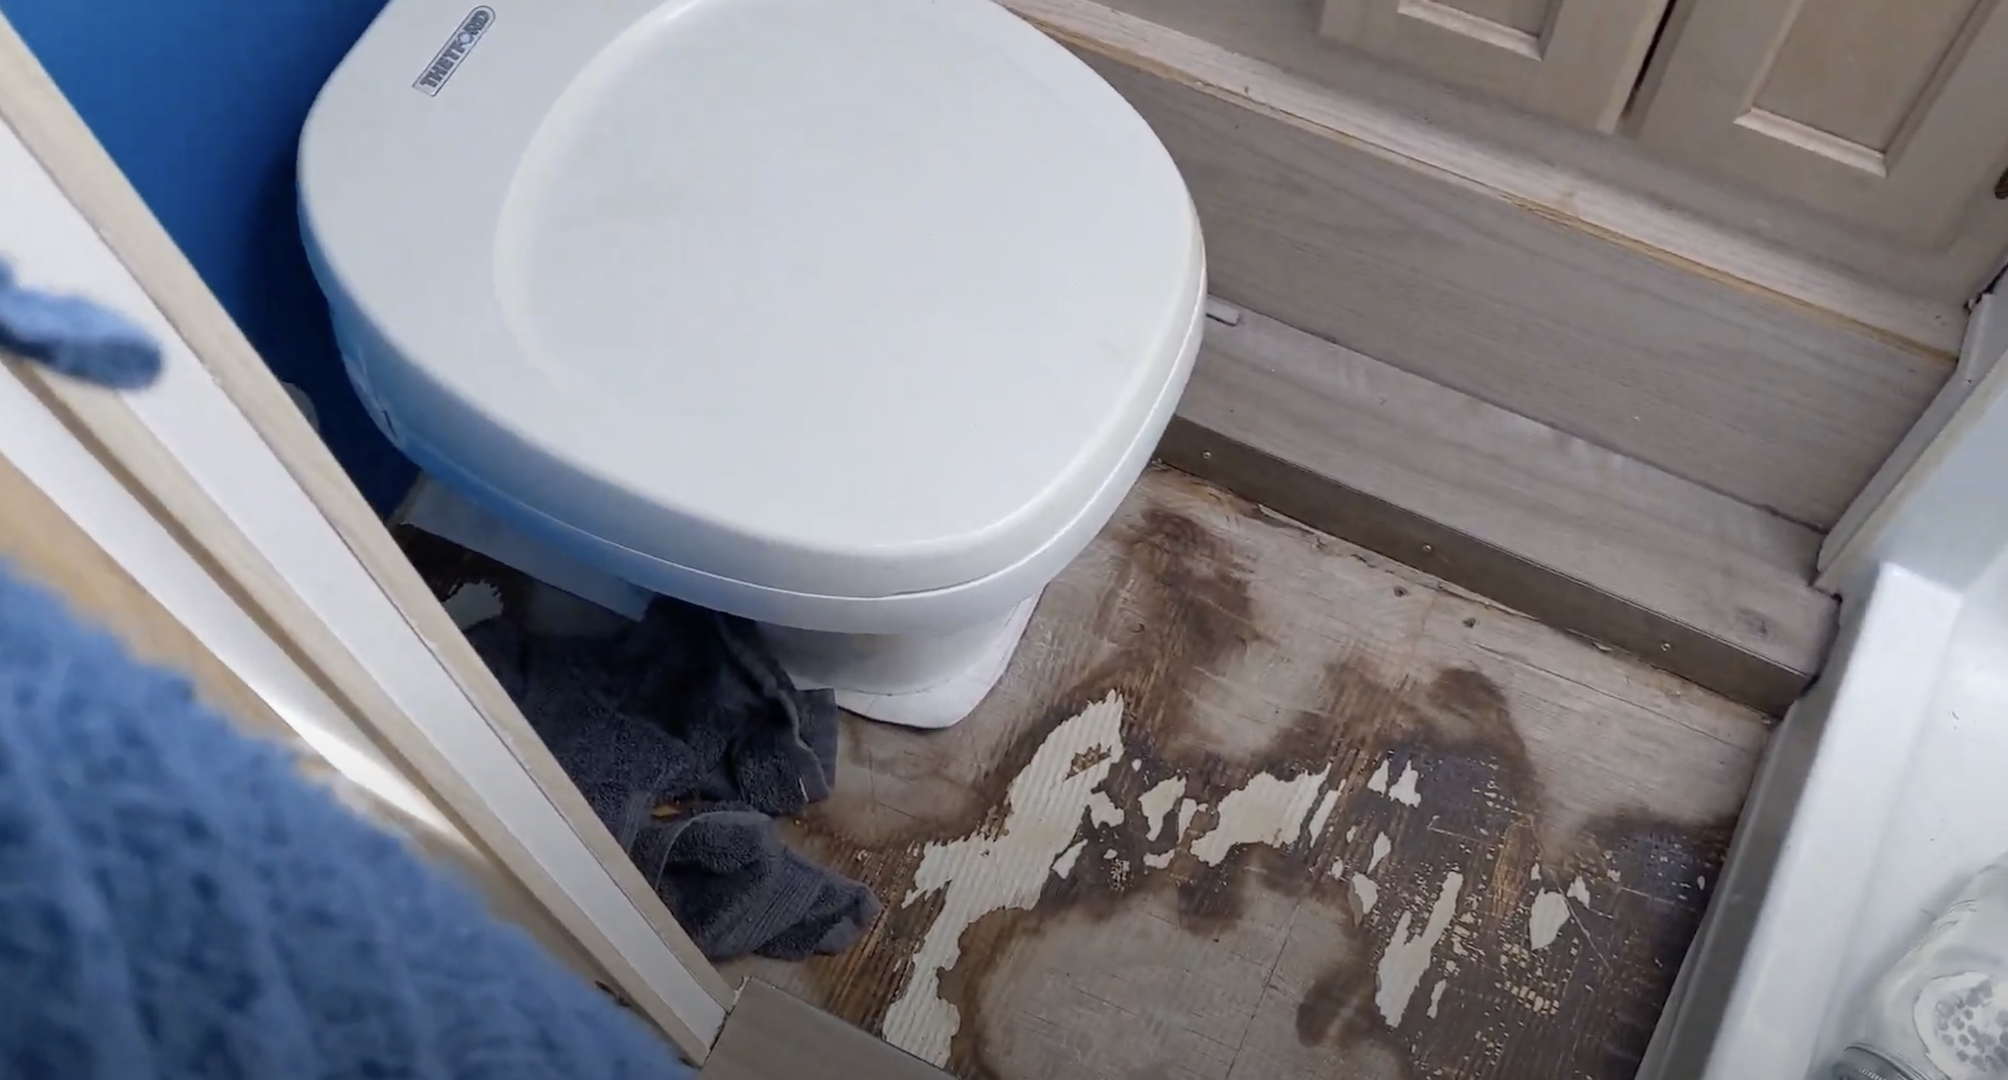 rv tech, customer brought in unit with toilet leaking doodoo feces